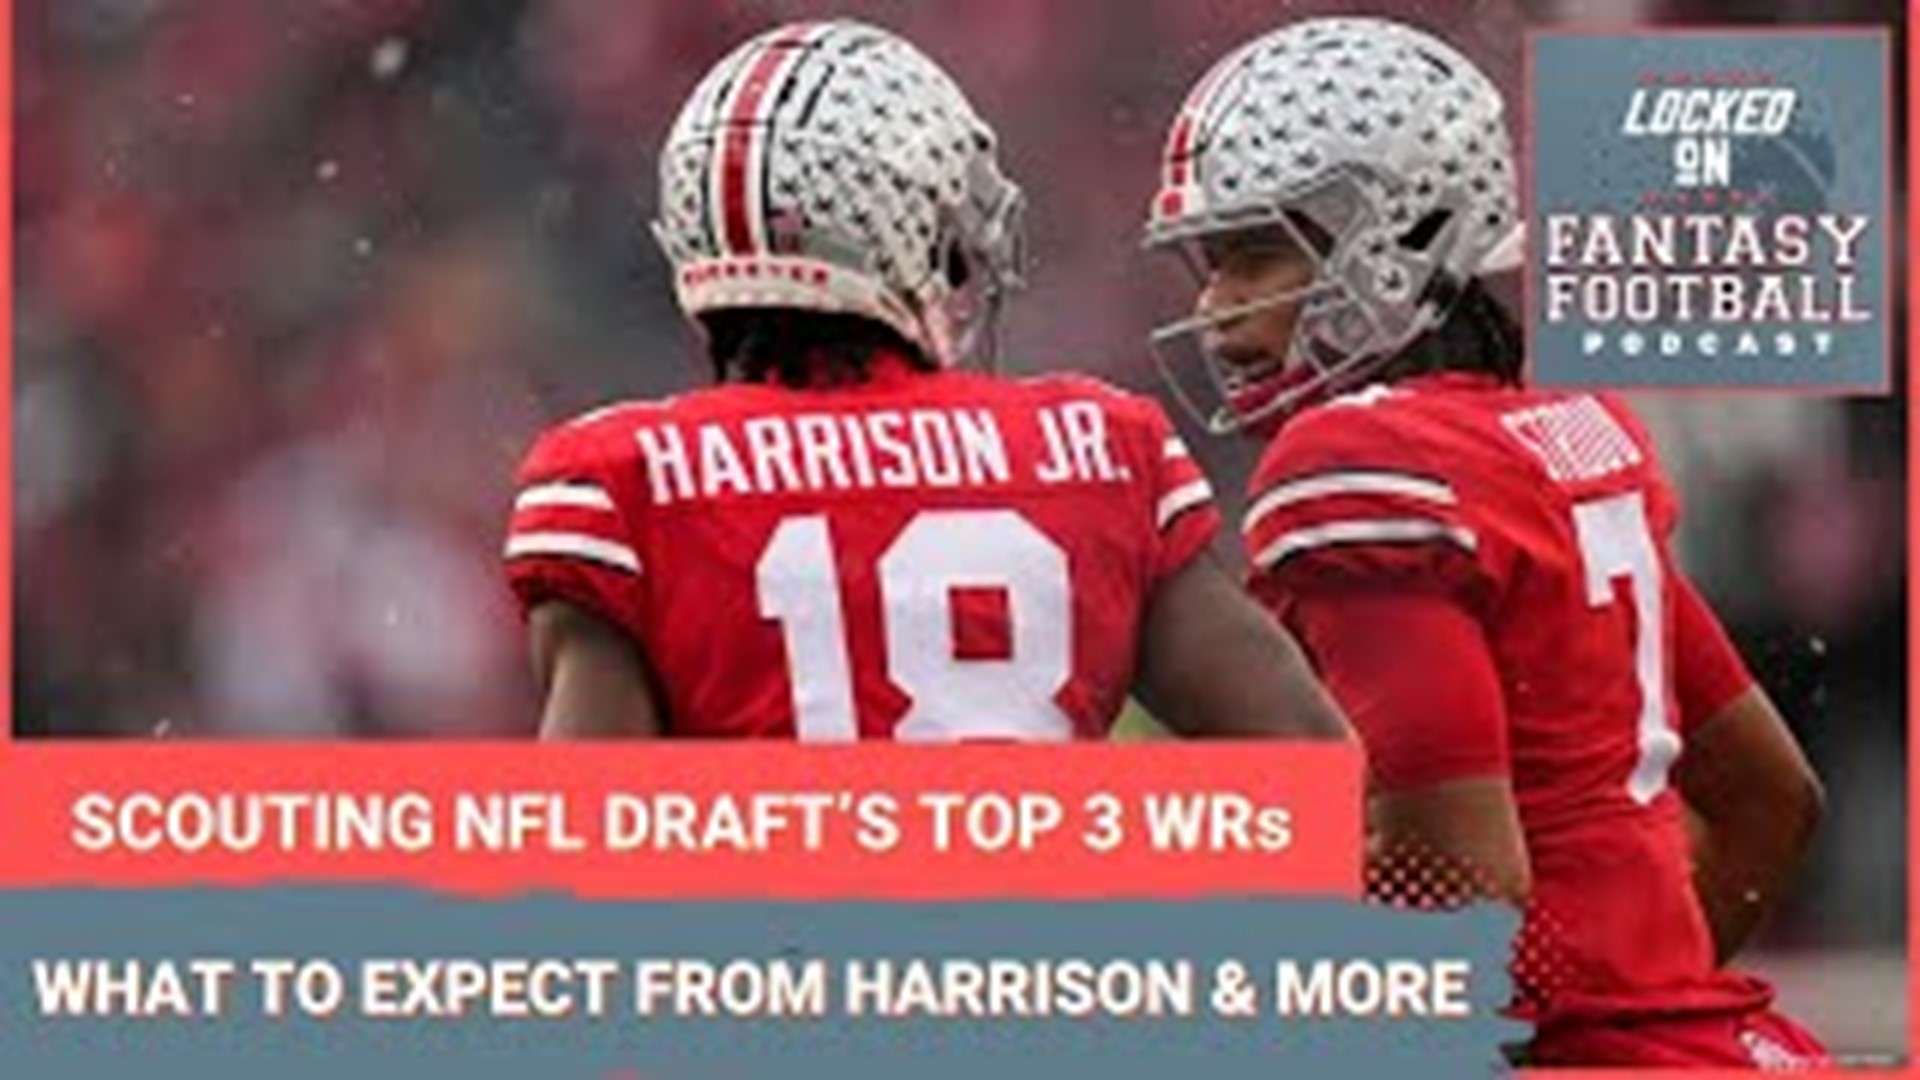 Sporting News.com's Vinnie Iyer and NFL.com's Michelle Magdziuk take a deep dive into the scouting reports for the top three wide receiver prospects in the draft.